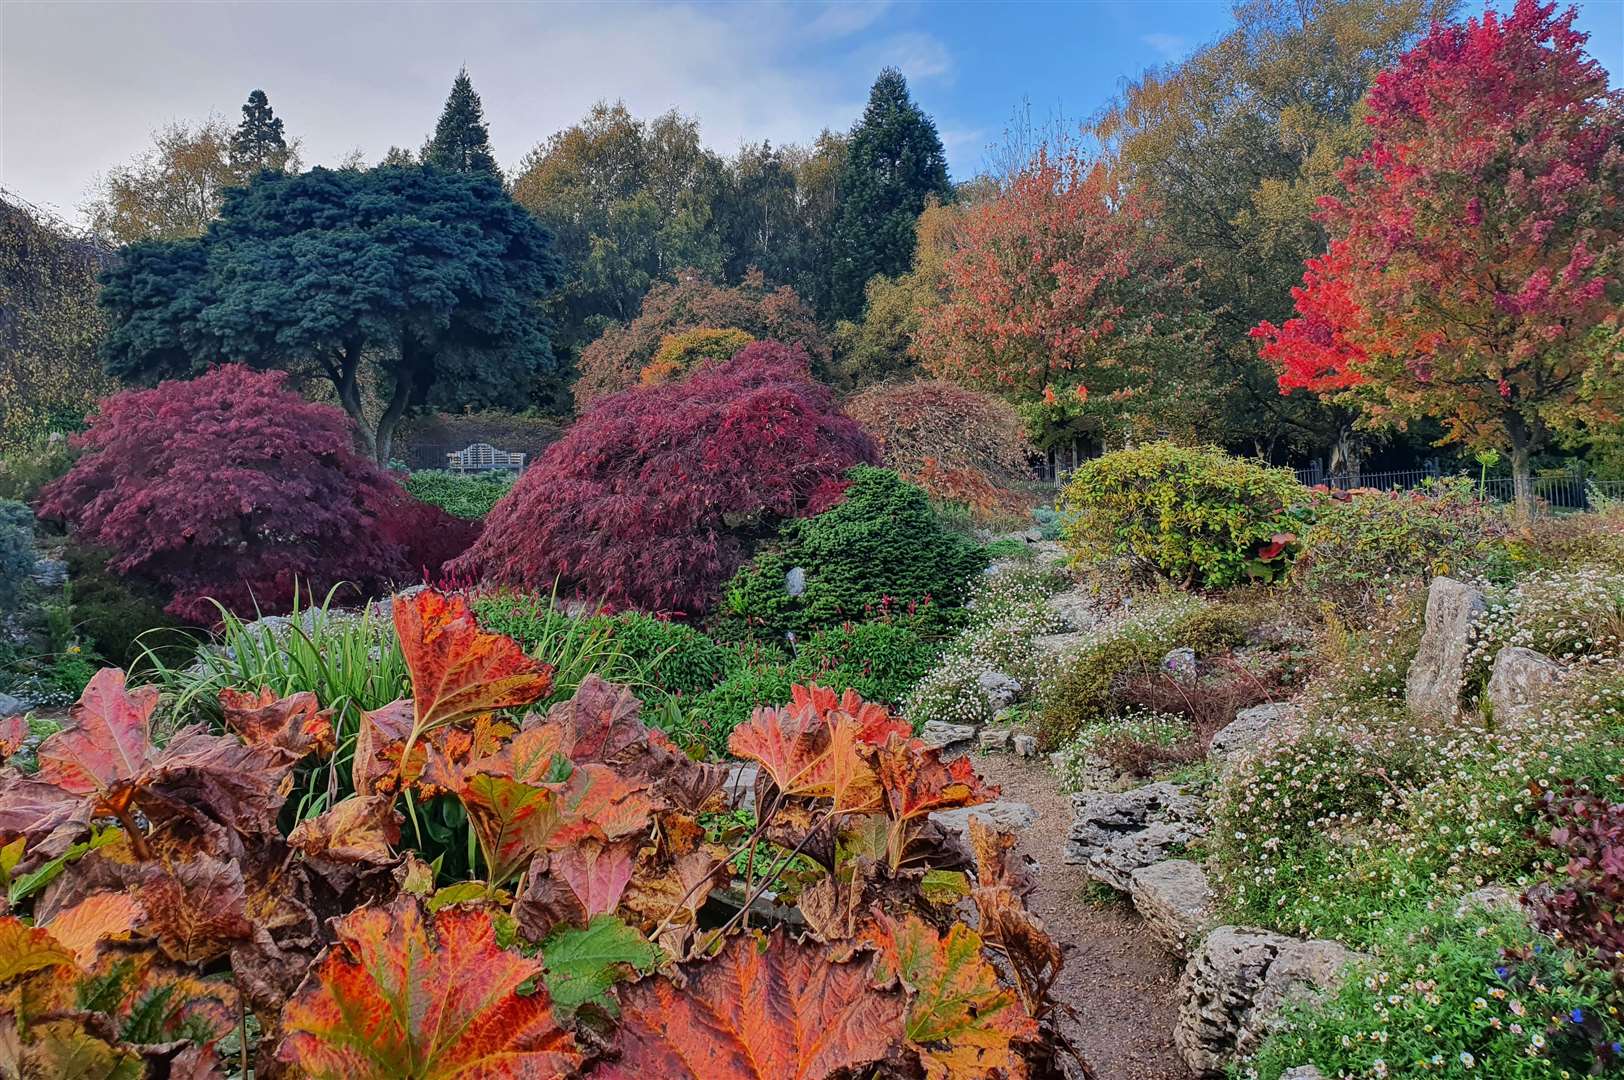 The National Trust would like people to enjoy the change in season. Image: National Trust Images / Nick Dougan.